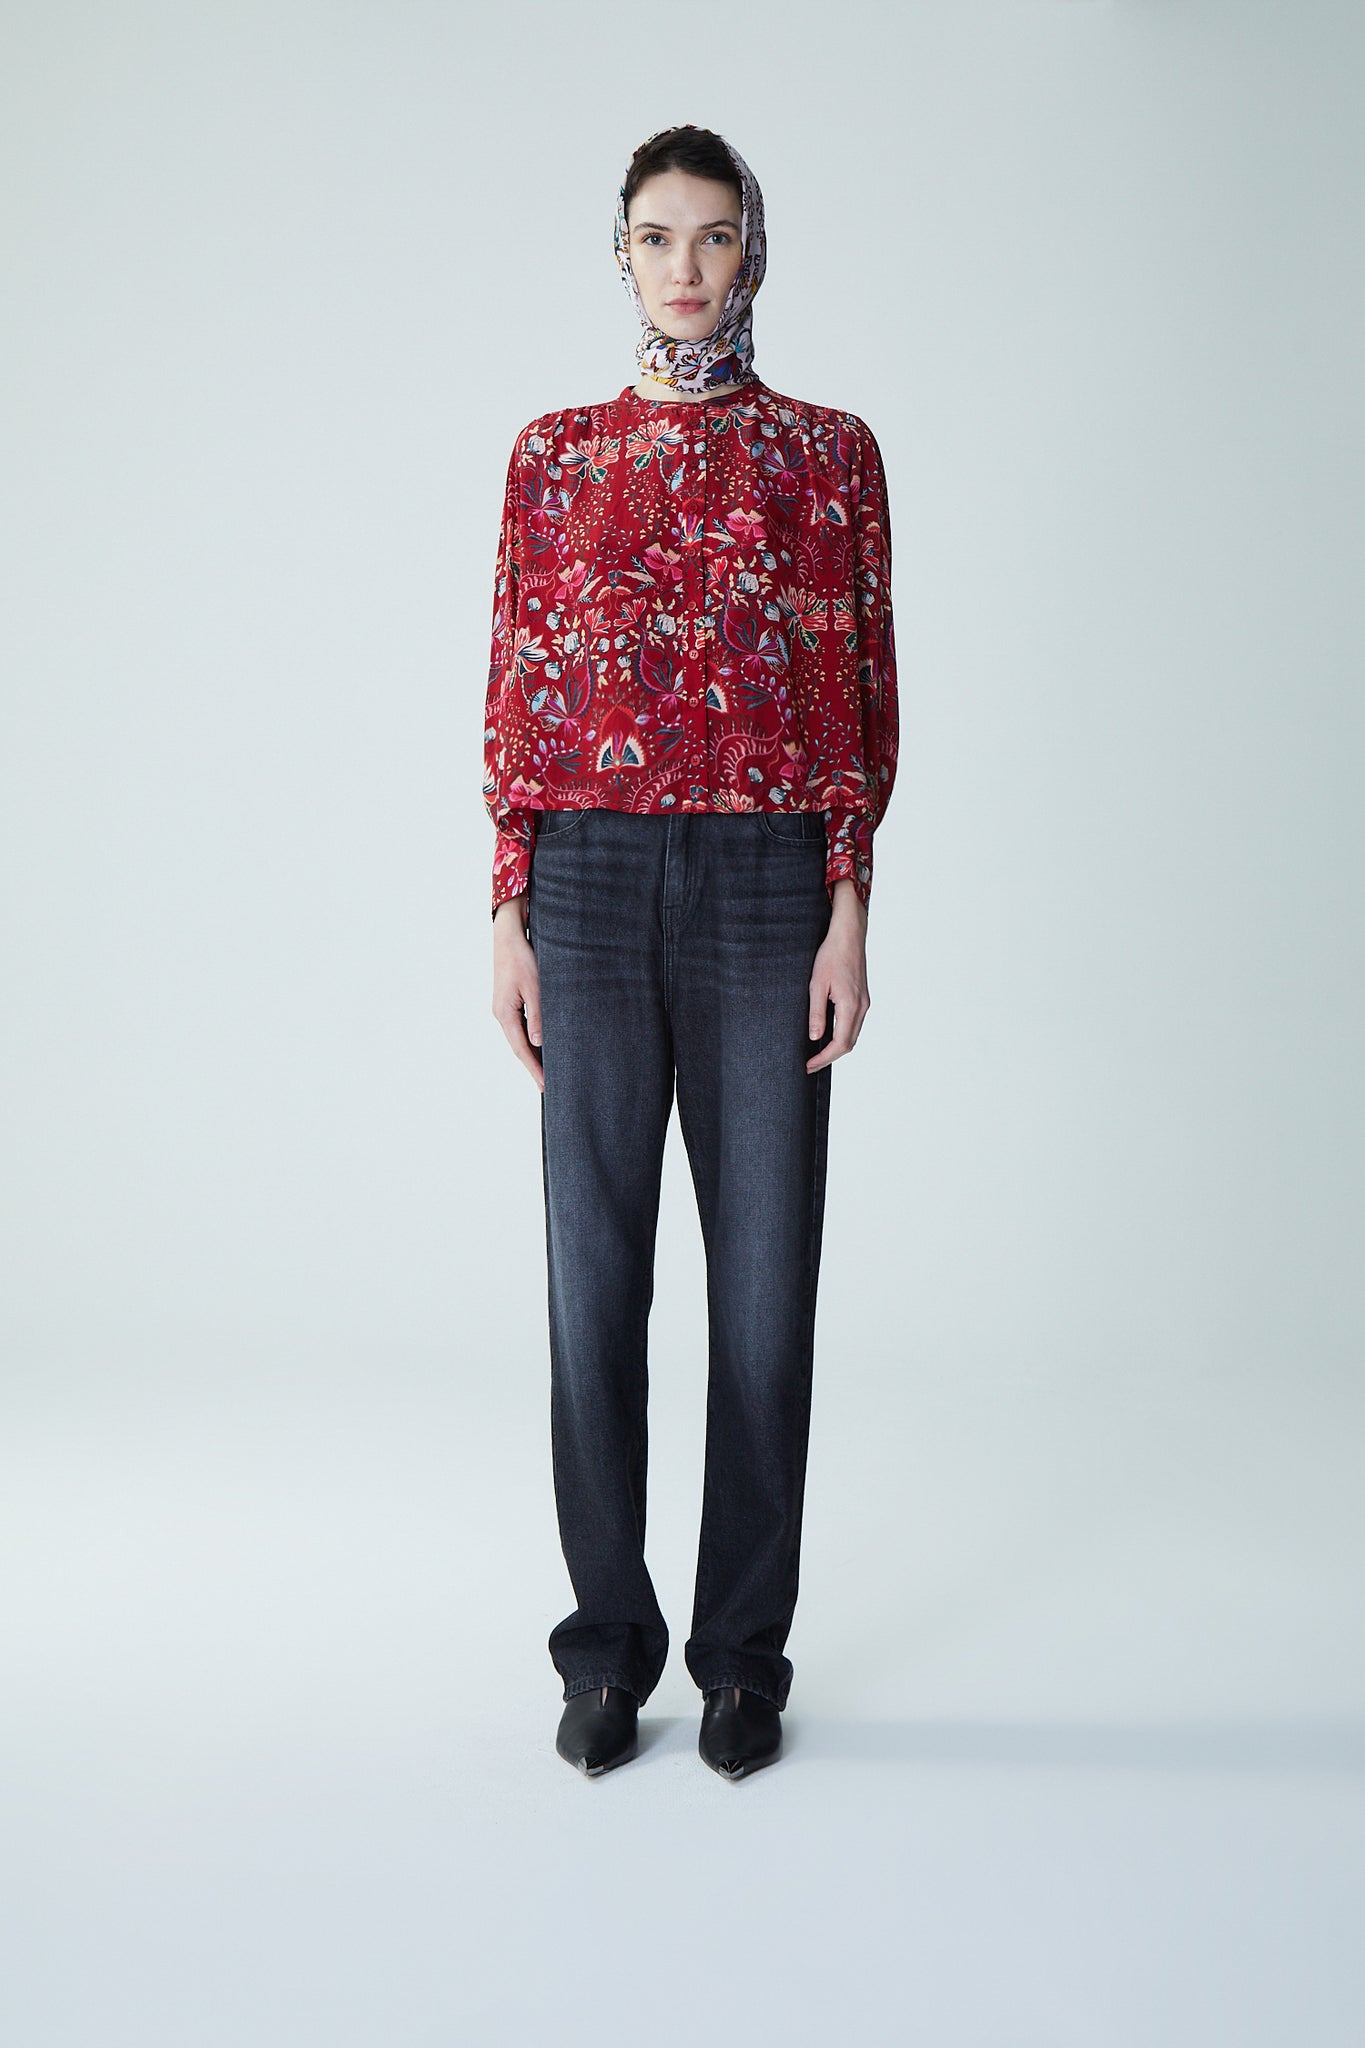 Palermo Celia Blouse in Red Berrie